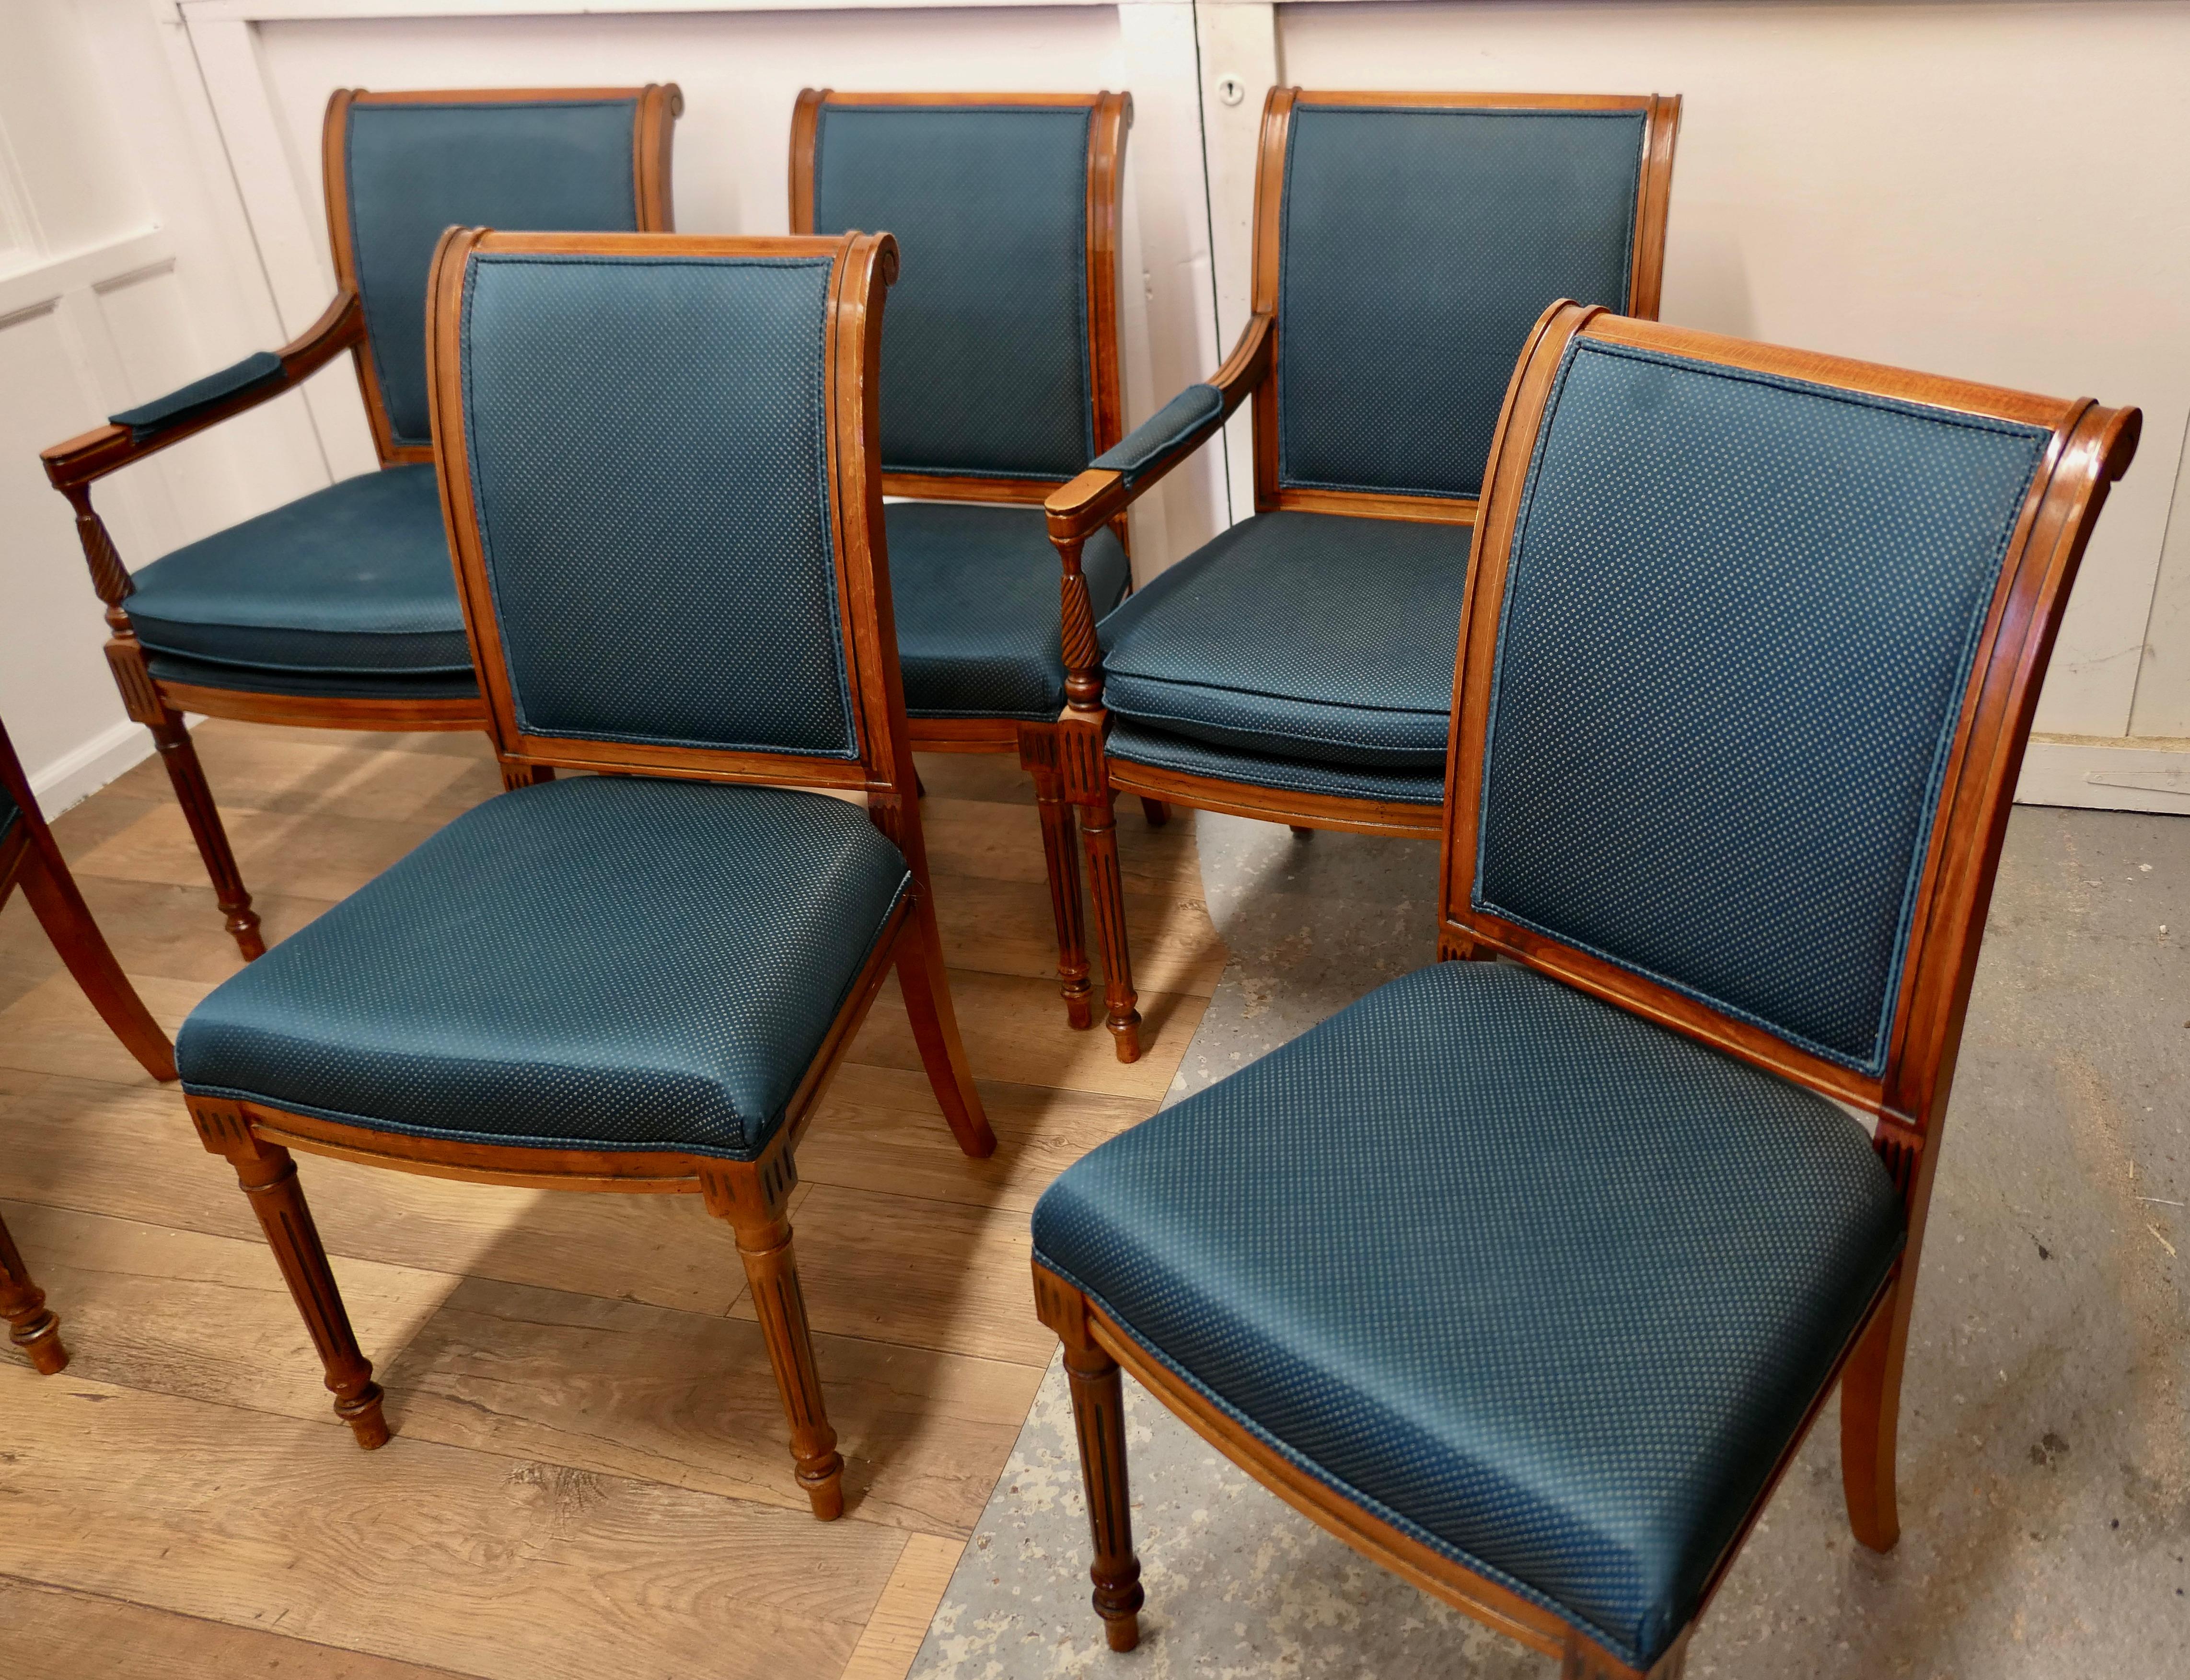 regency style chairs